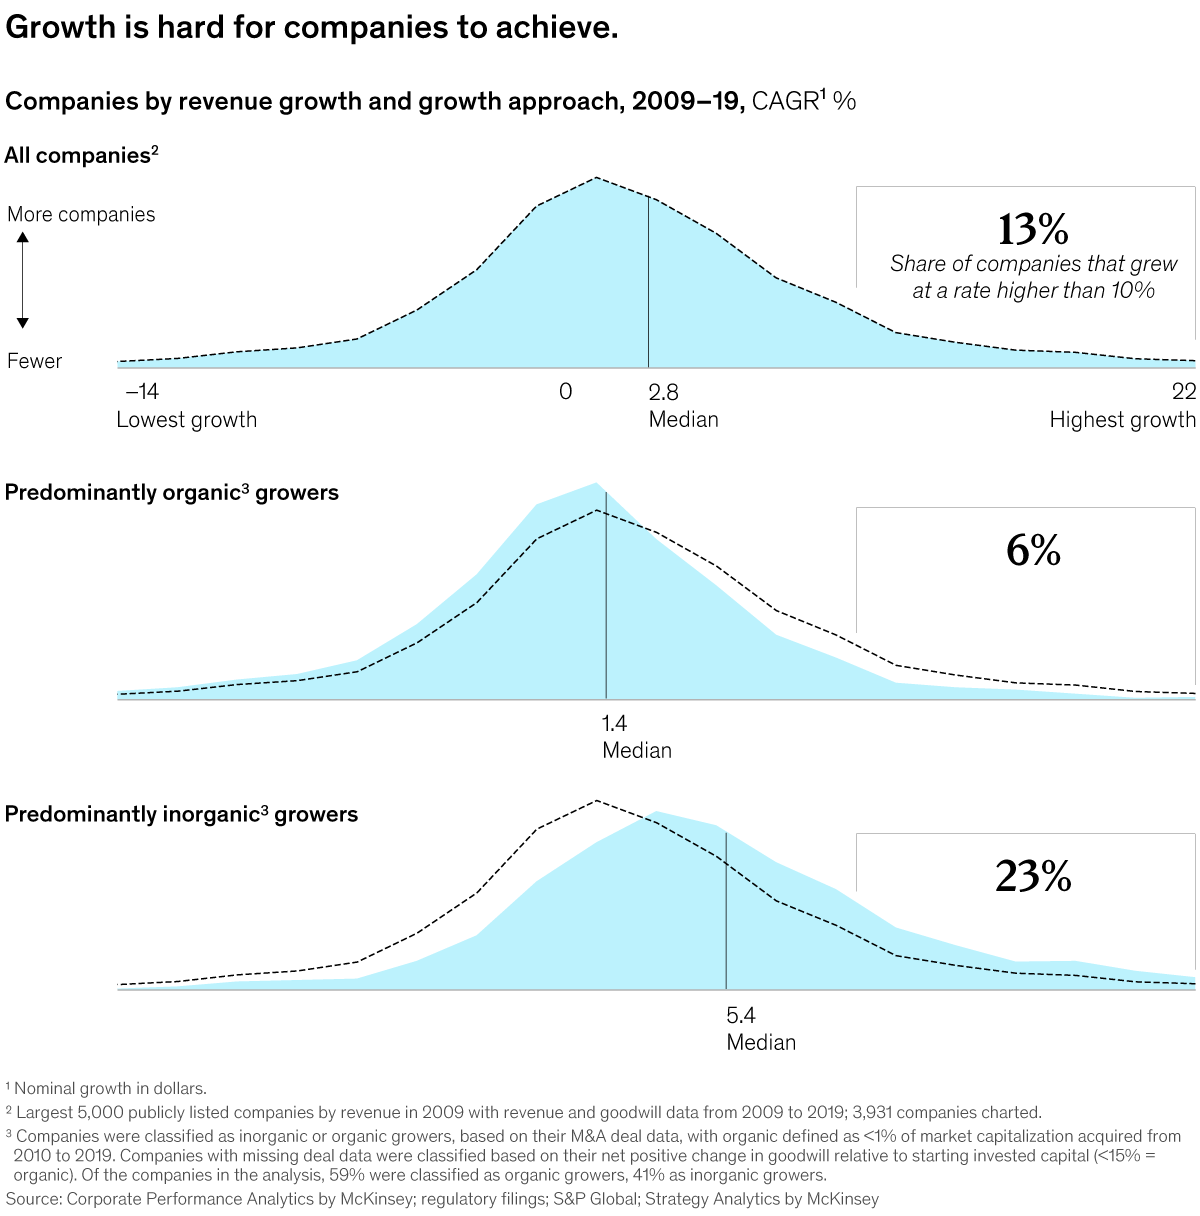 Chart of companies' revenue growth and growth approach from 2009-2019